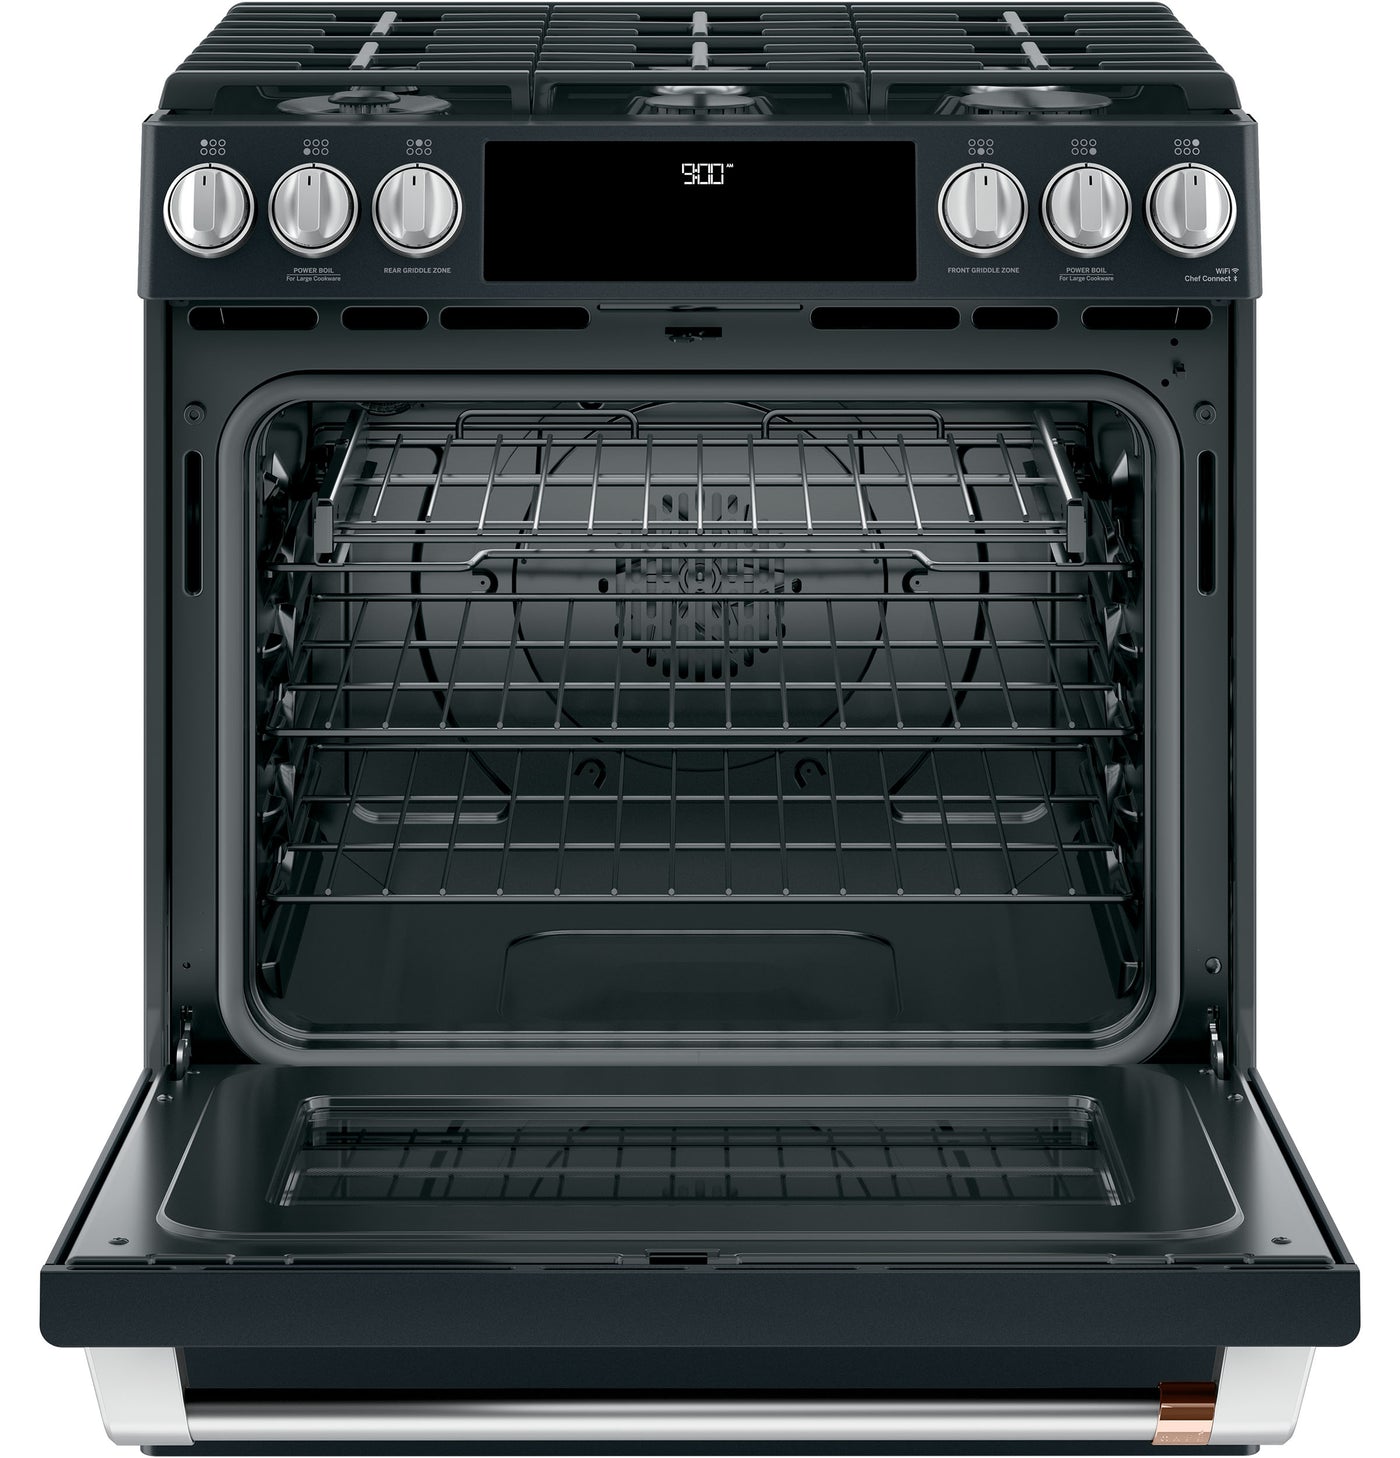 Café™ Matte Black 30" Slide-In Front Control Dual-Fuel Convection Range with Air Fry and Warming Drawer (5.7 CU.Ft) - CC2S900P3MD1